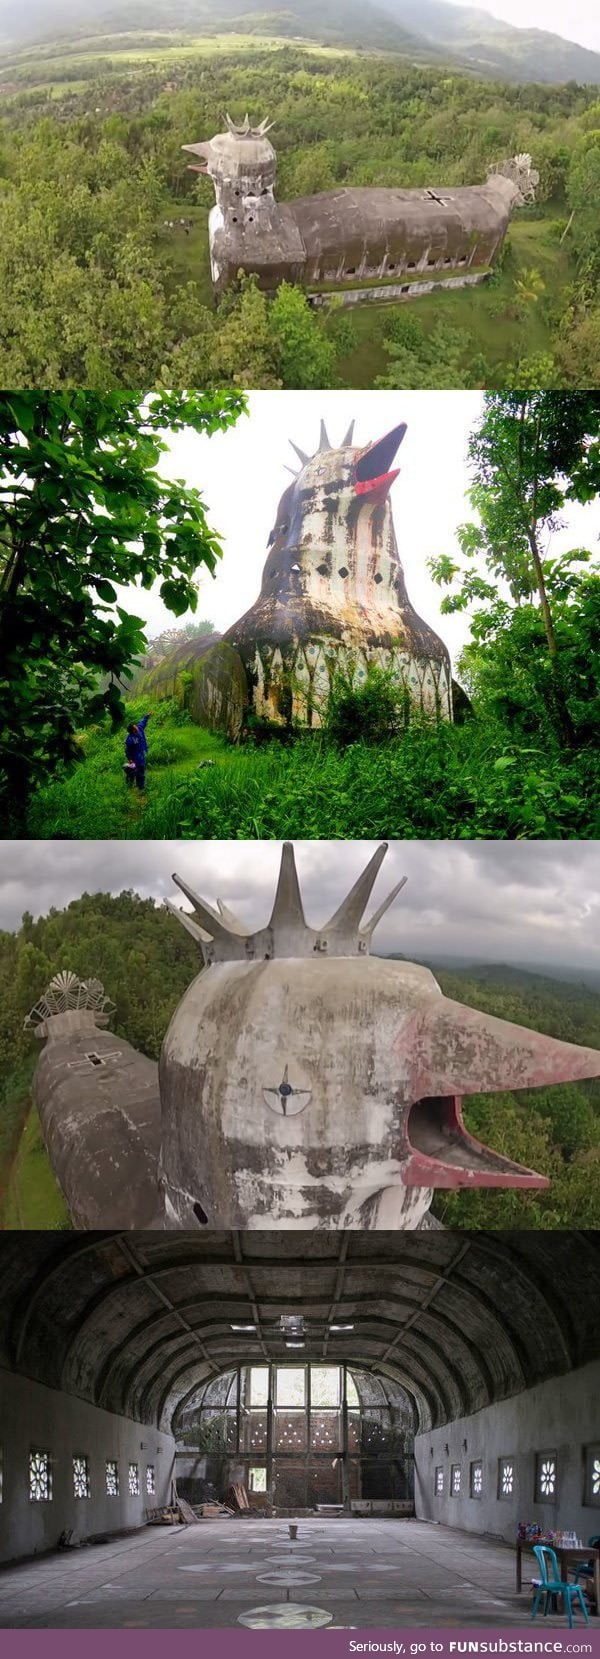 There is an abandoned chicken church in Indonesia